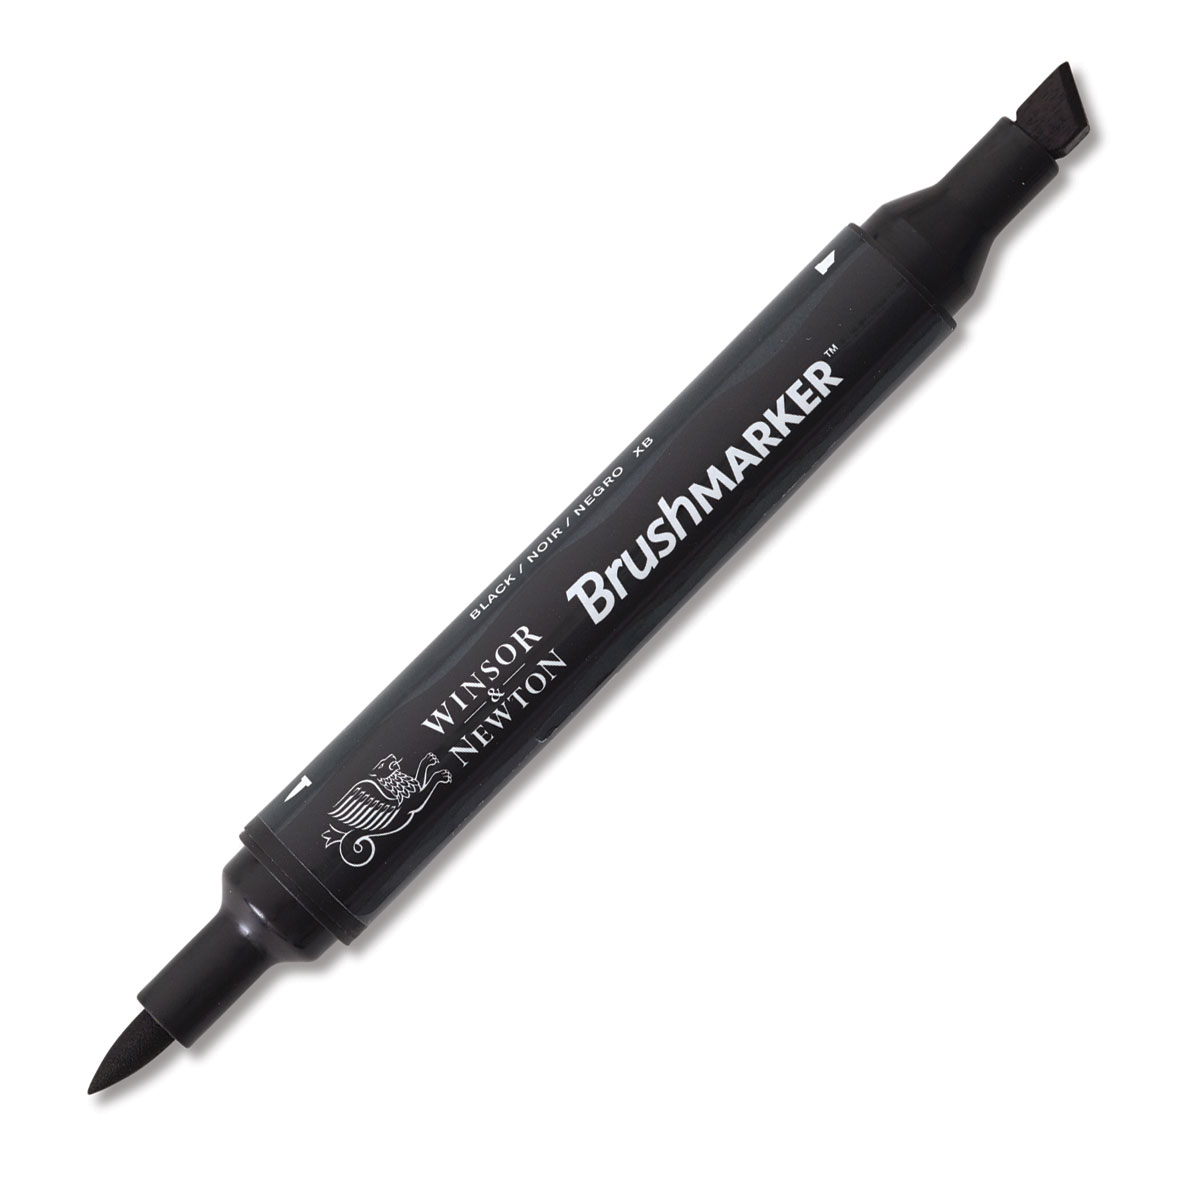 Winsor & Newton Promarker Brush Twin Tipped Alcohol Based Graphic